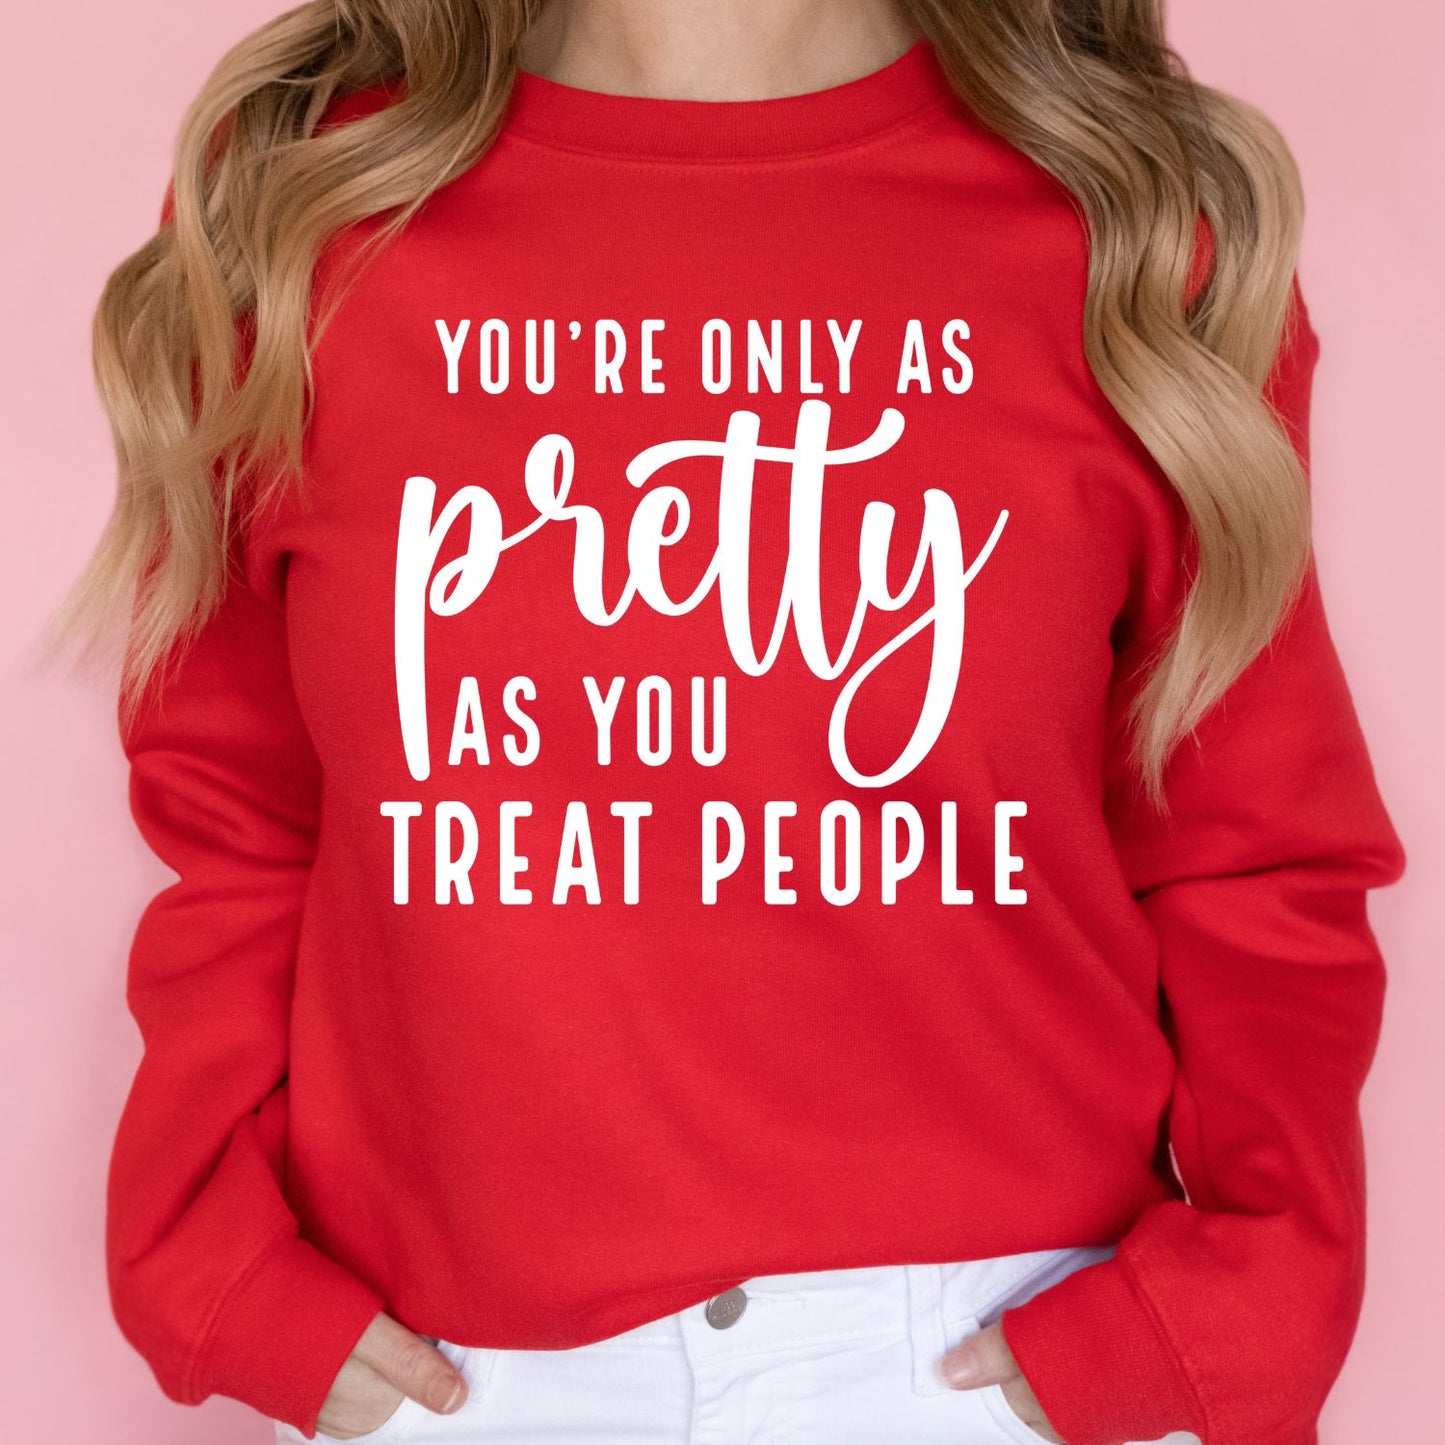 You're Only as Pretty as You Treat People